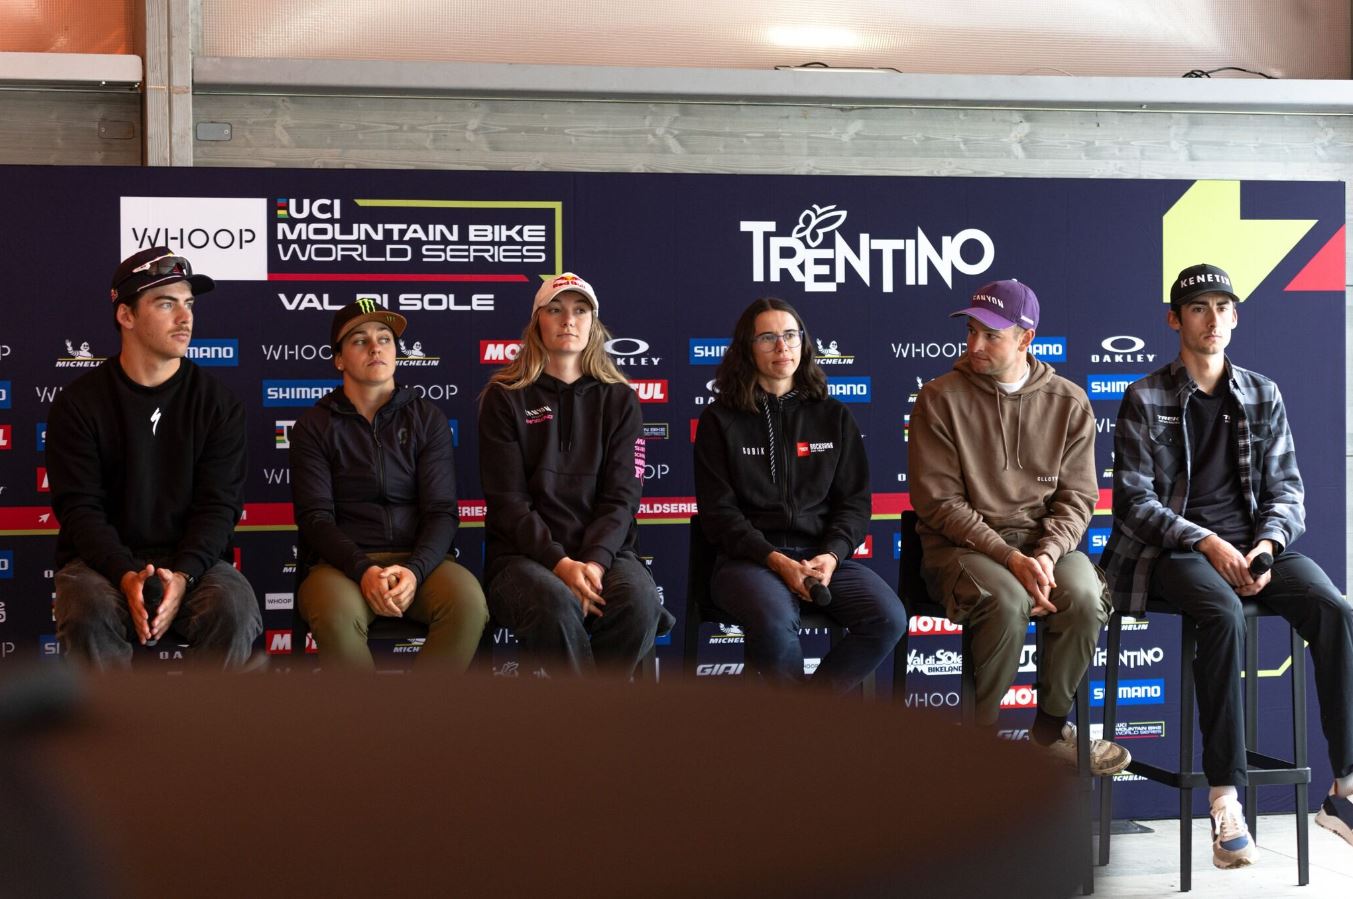 ‘NOT RACING FOR SECOND’ - SEAGRAVE AND CABIROU REFUSING TO SETTLE FOR RUNNERS-UP SPOTS AS WHOOP UCI MOUNTAIN BIKE WORLD SERIES ARRIVES IN VAL DI SOLE, TRENTINO